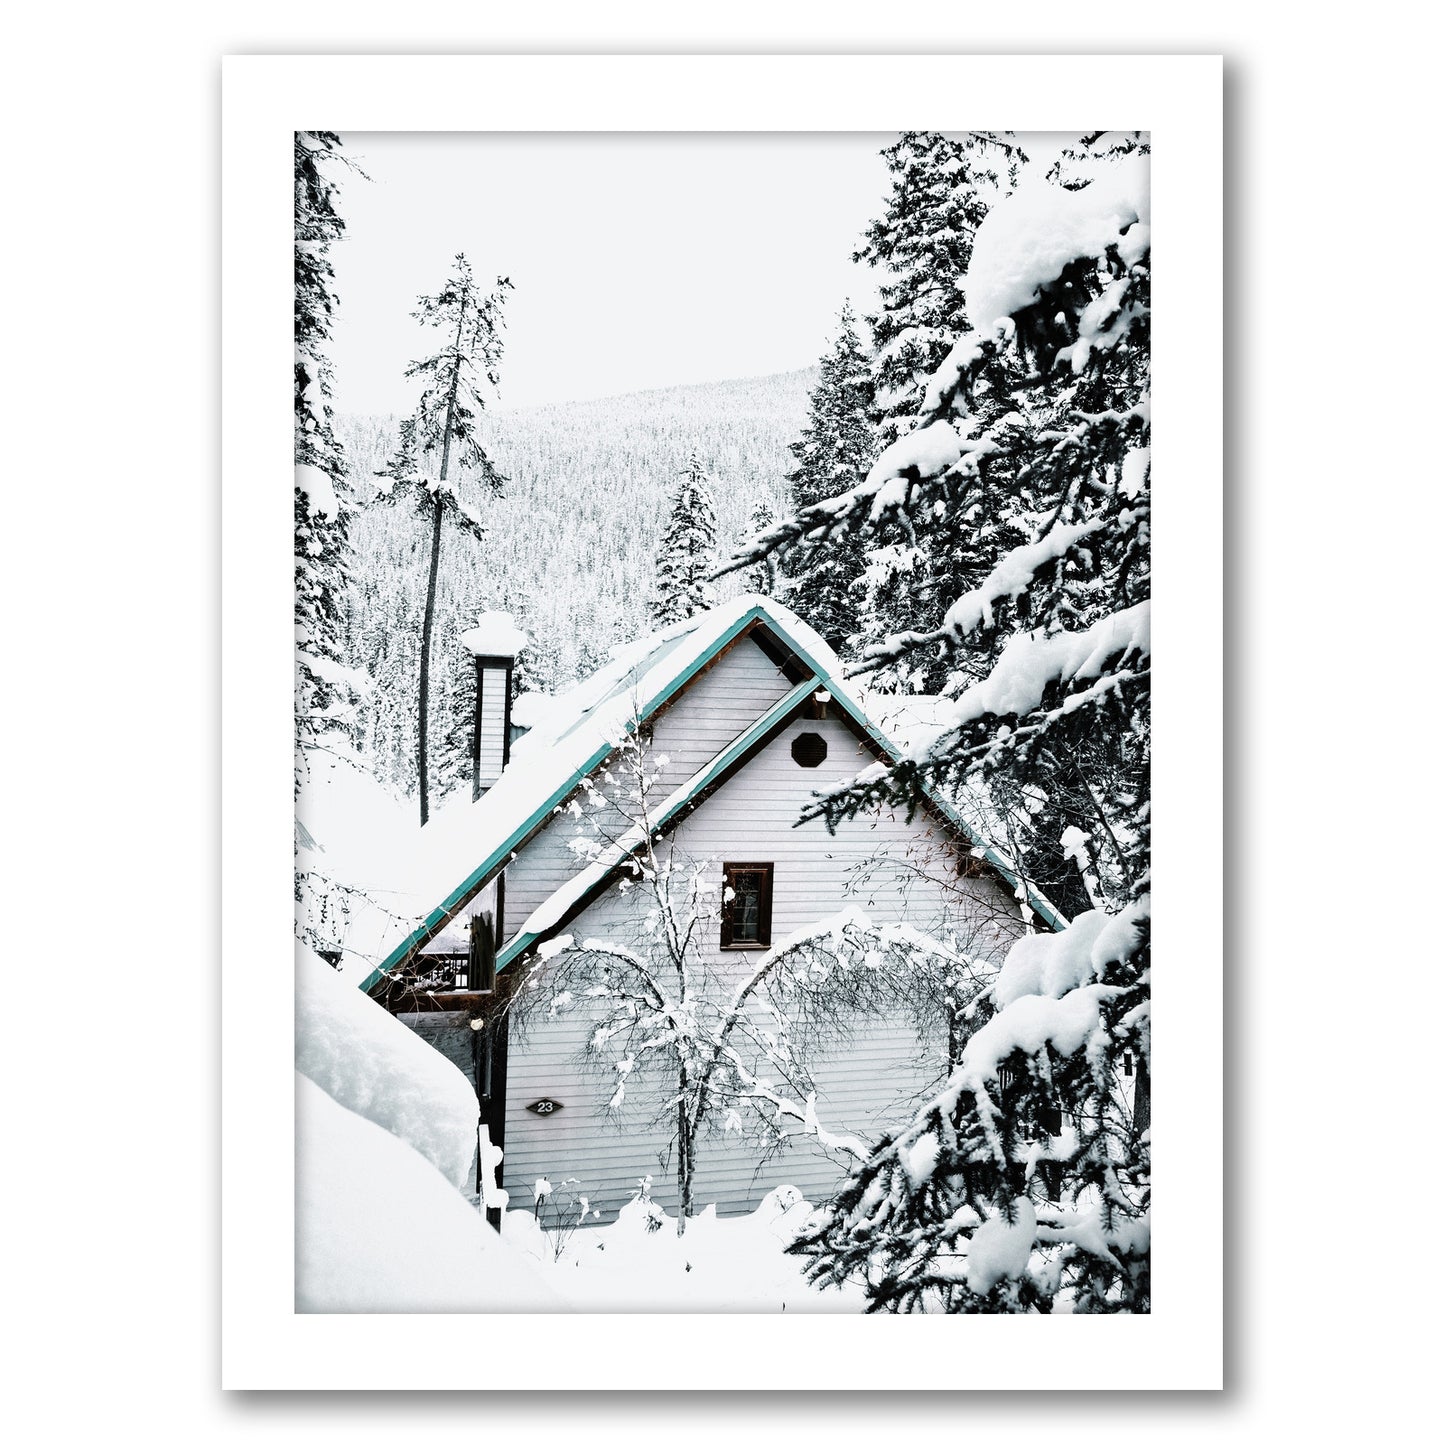 Cabins In Snowy Pine Tree Forest by Tanya Shumkina - White Framed Print - Wall Art - Americanflat